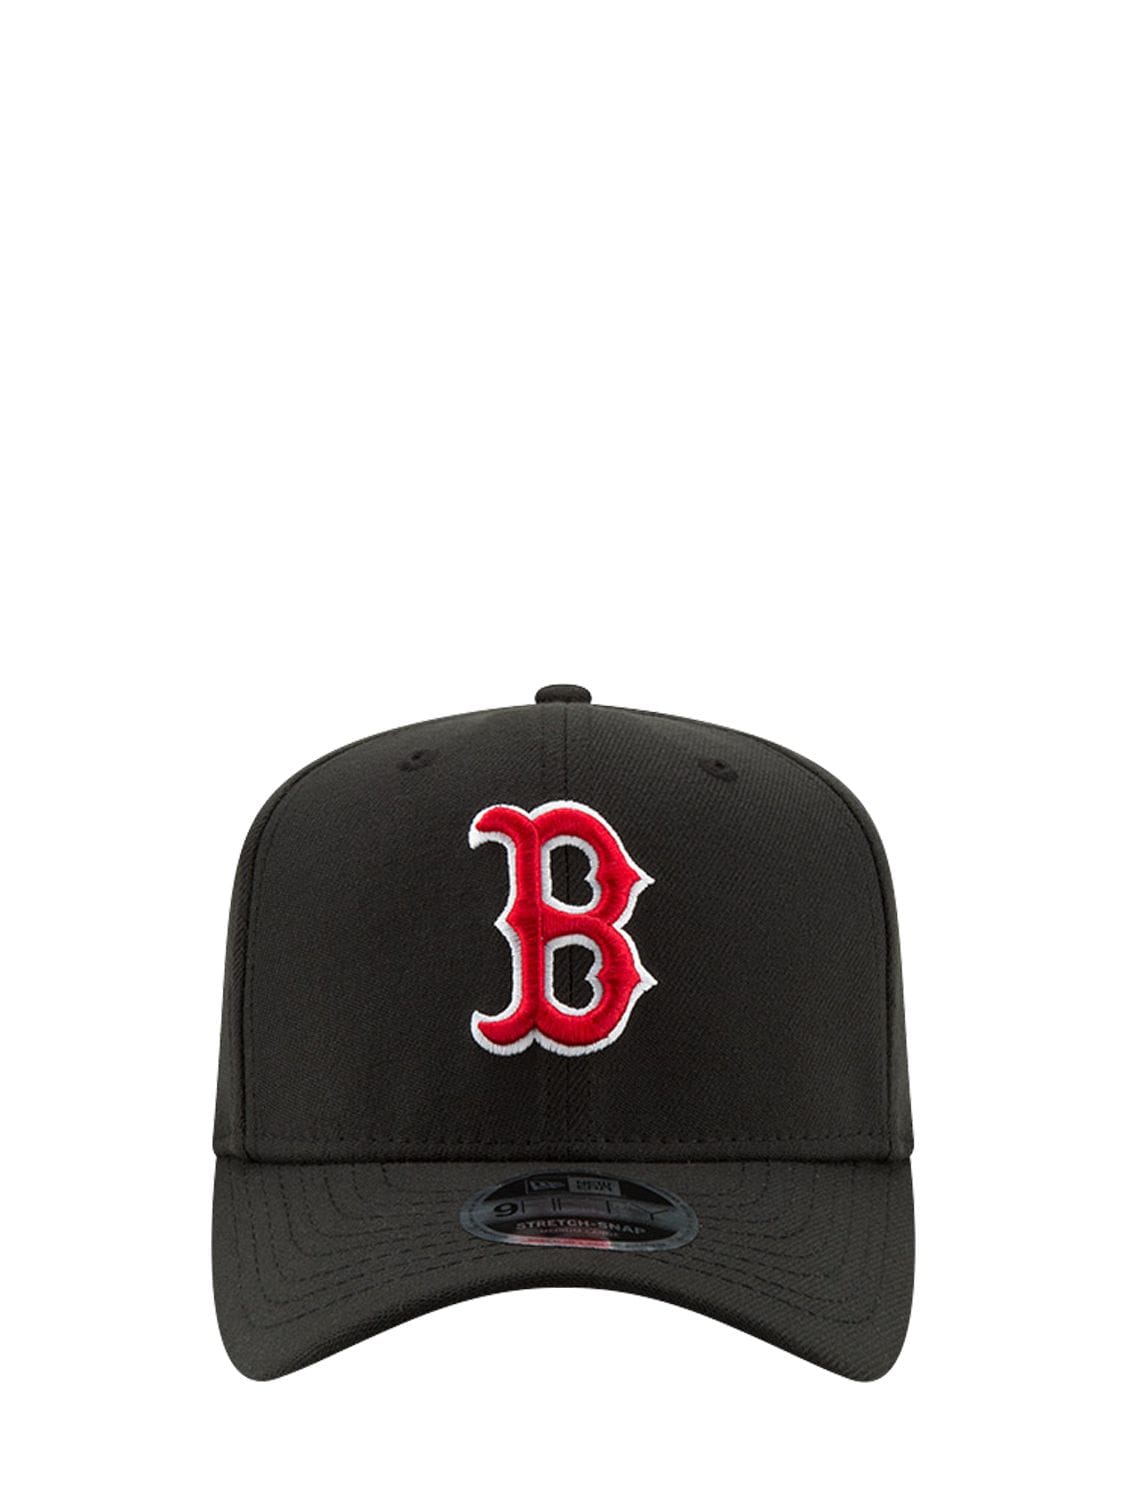 Image of Stretch Snap 9fifty Boston Red Sox Hat